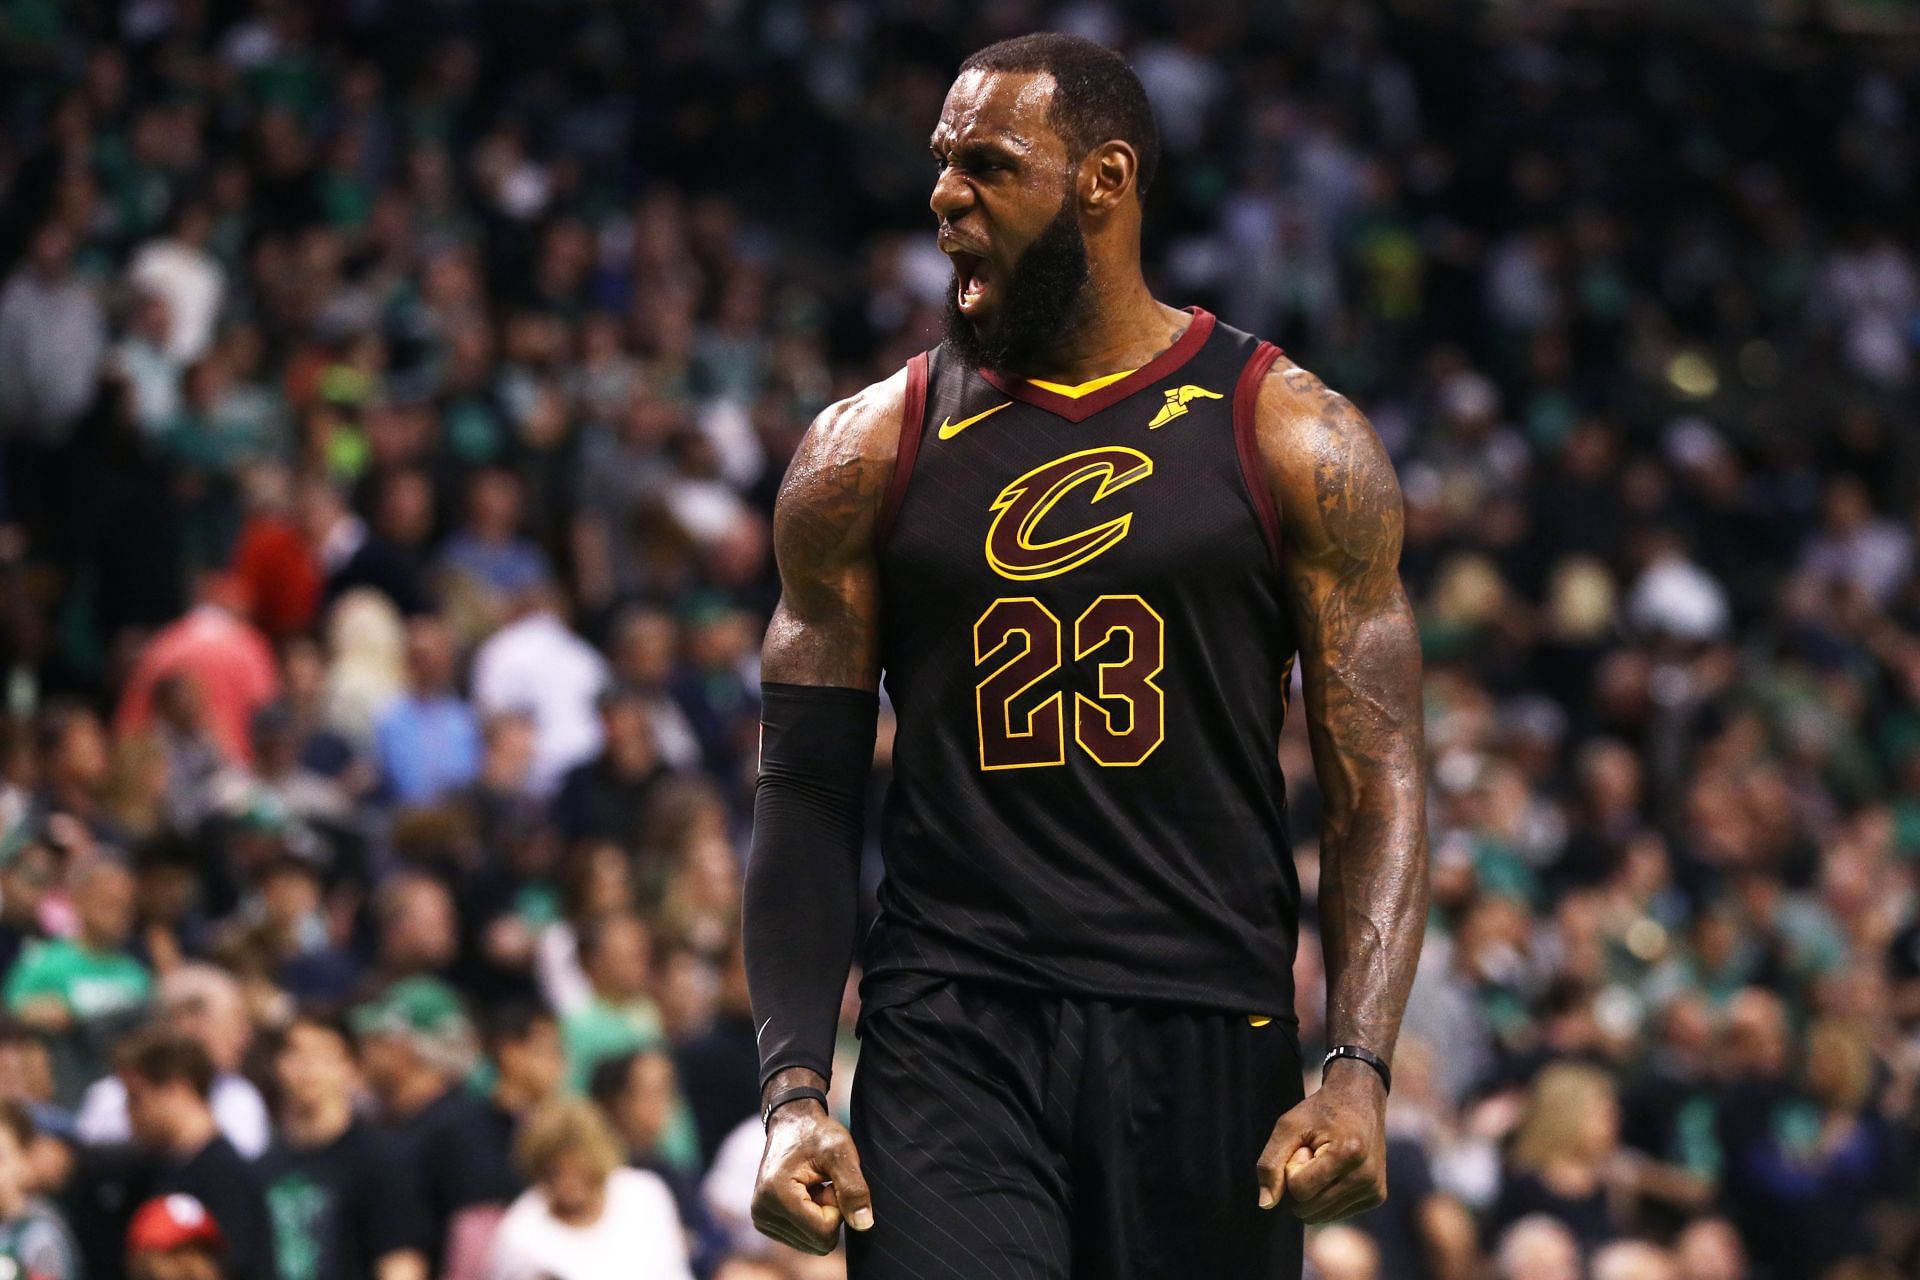 LeBron James dominated the East for a long time during his career.